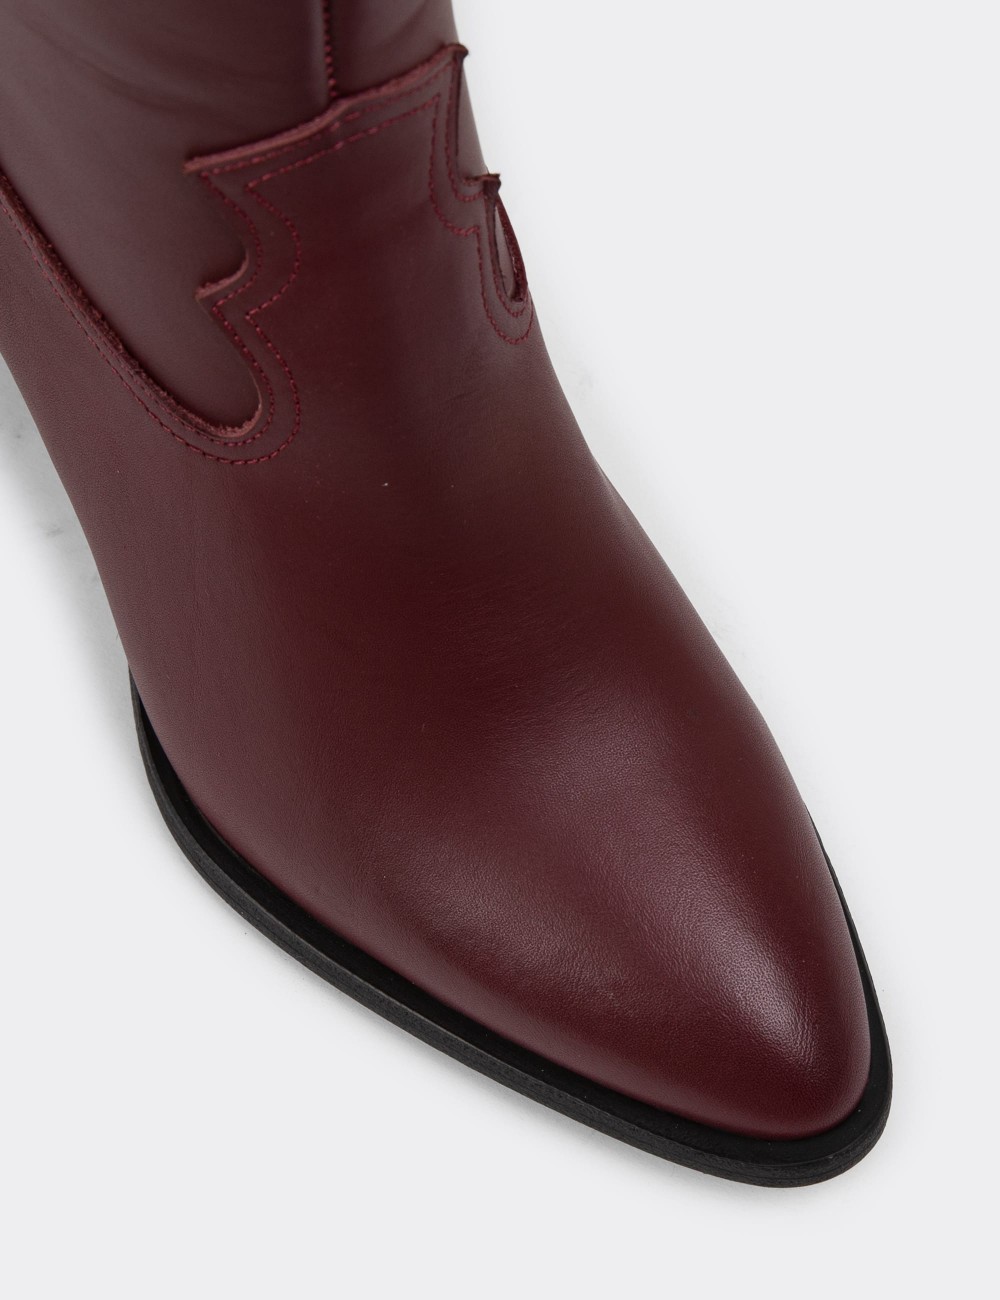 Burgundy Leather Boots - E4460ZBRDC03